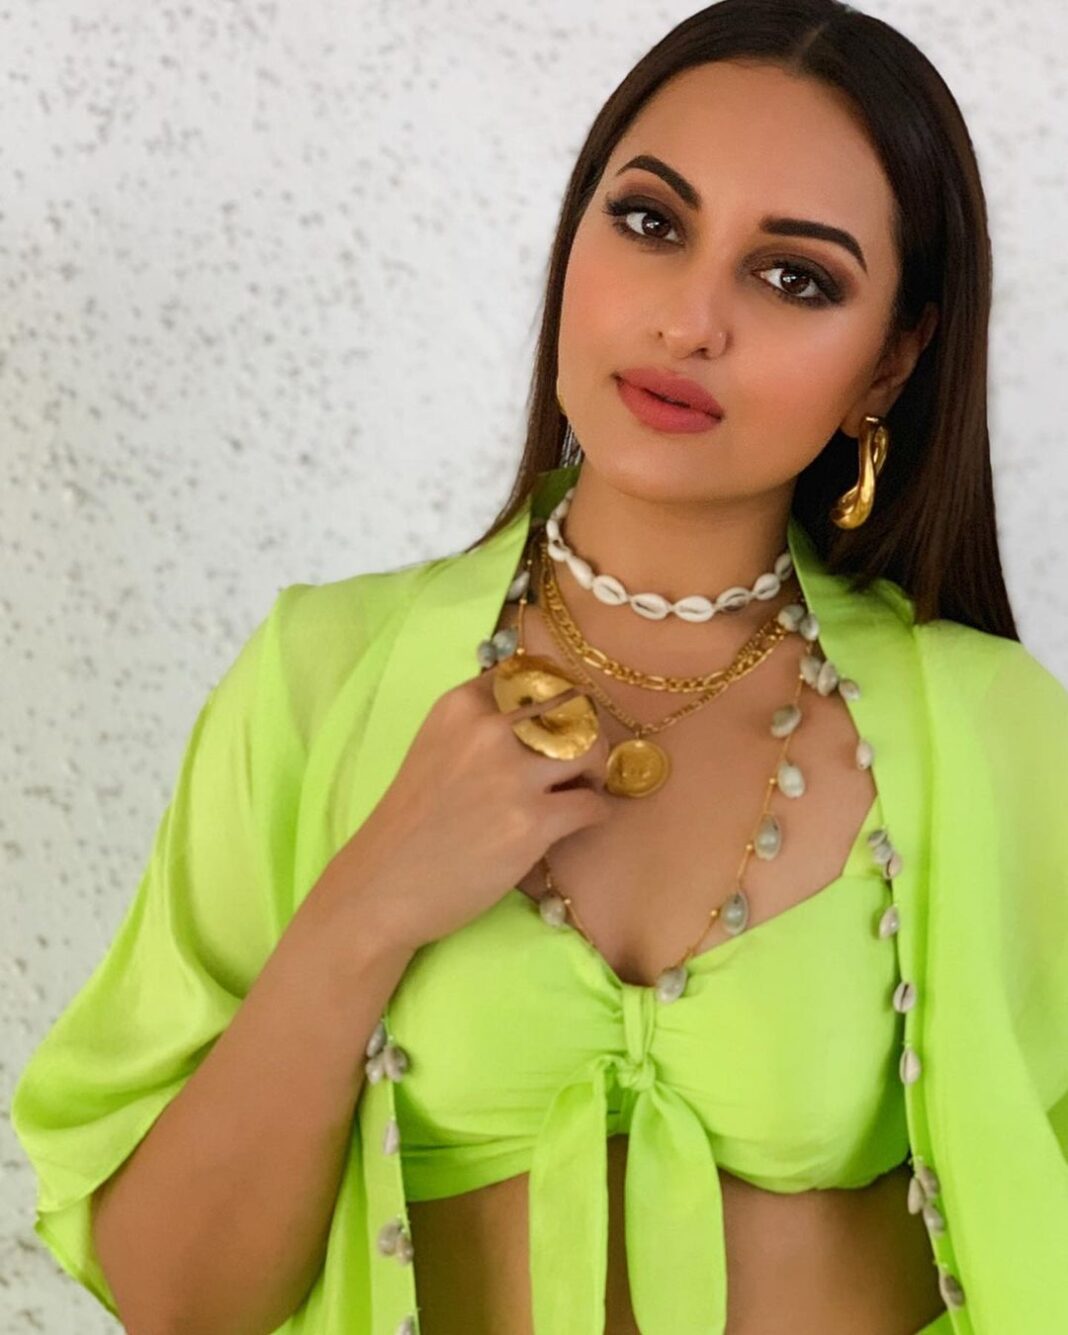 Sonakshi Sinha Instagram - Day 1 of #khandaanishafakhana promotions! Styled by @mohitrai (tap for deets) hair by @themadhurinakhale and makeup by @divyachablani15 💚 #sonastylefile #neonlove